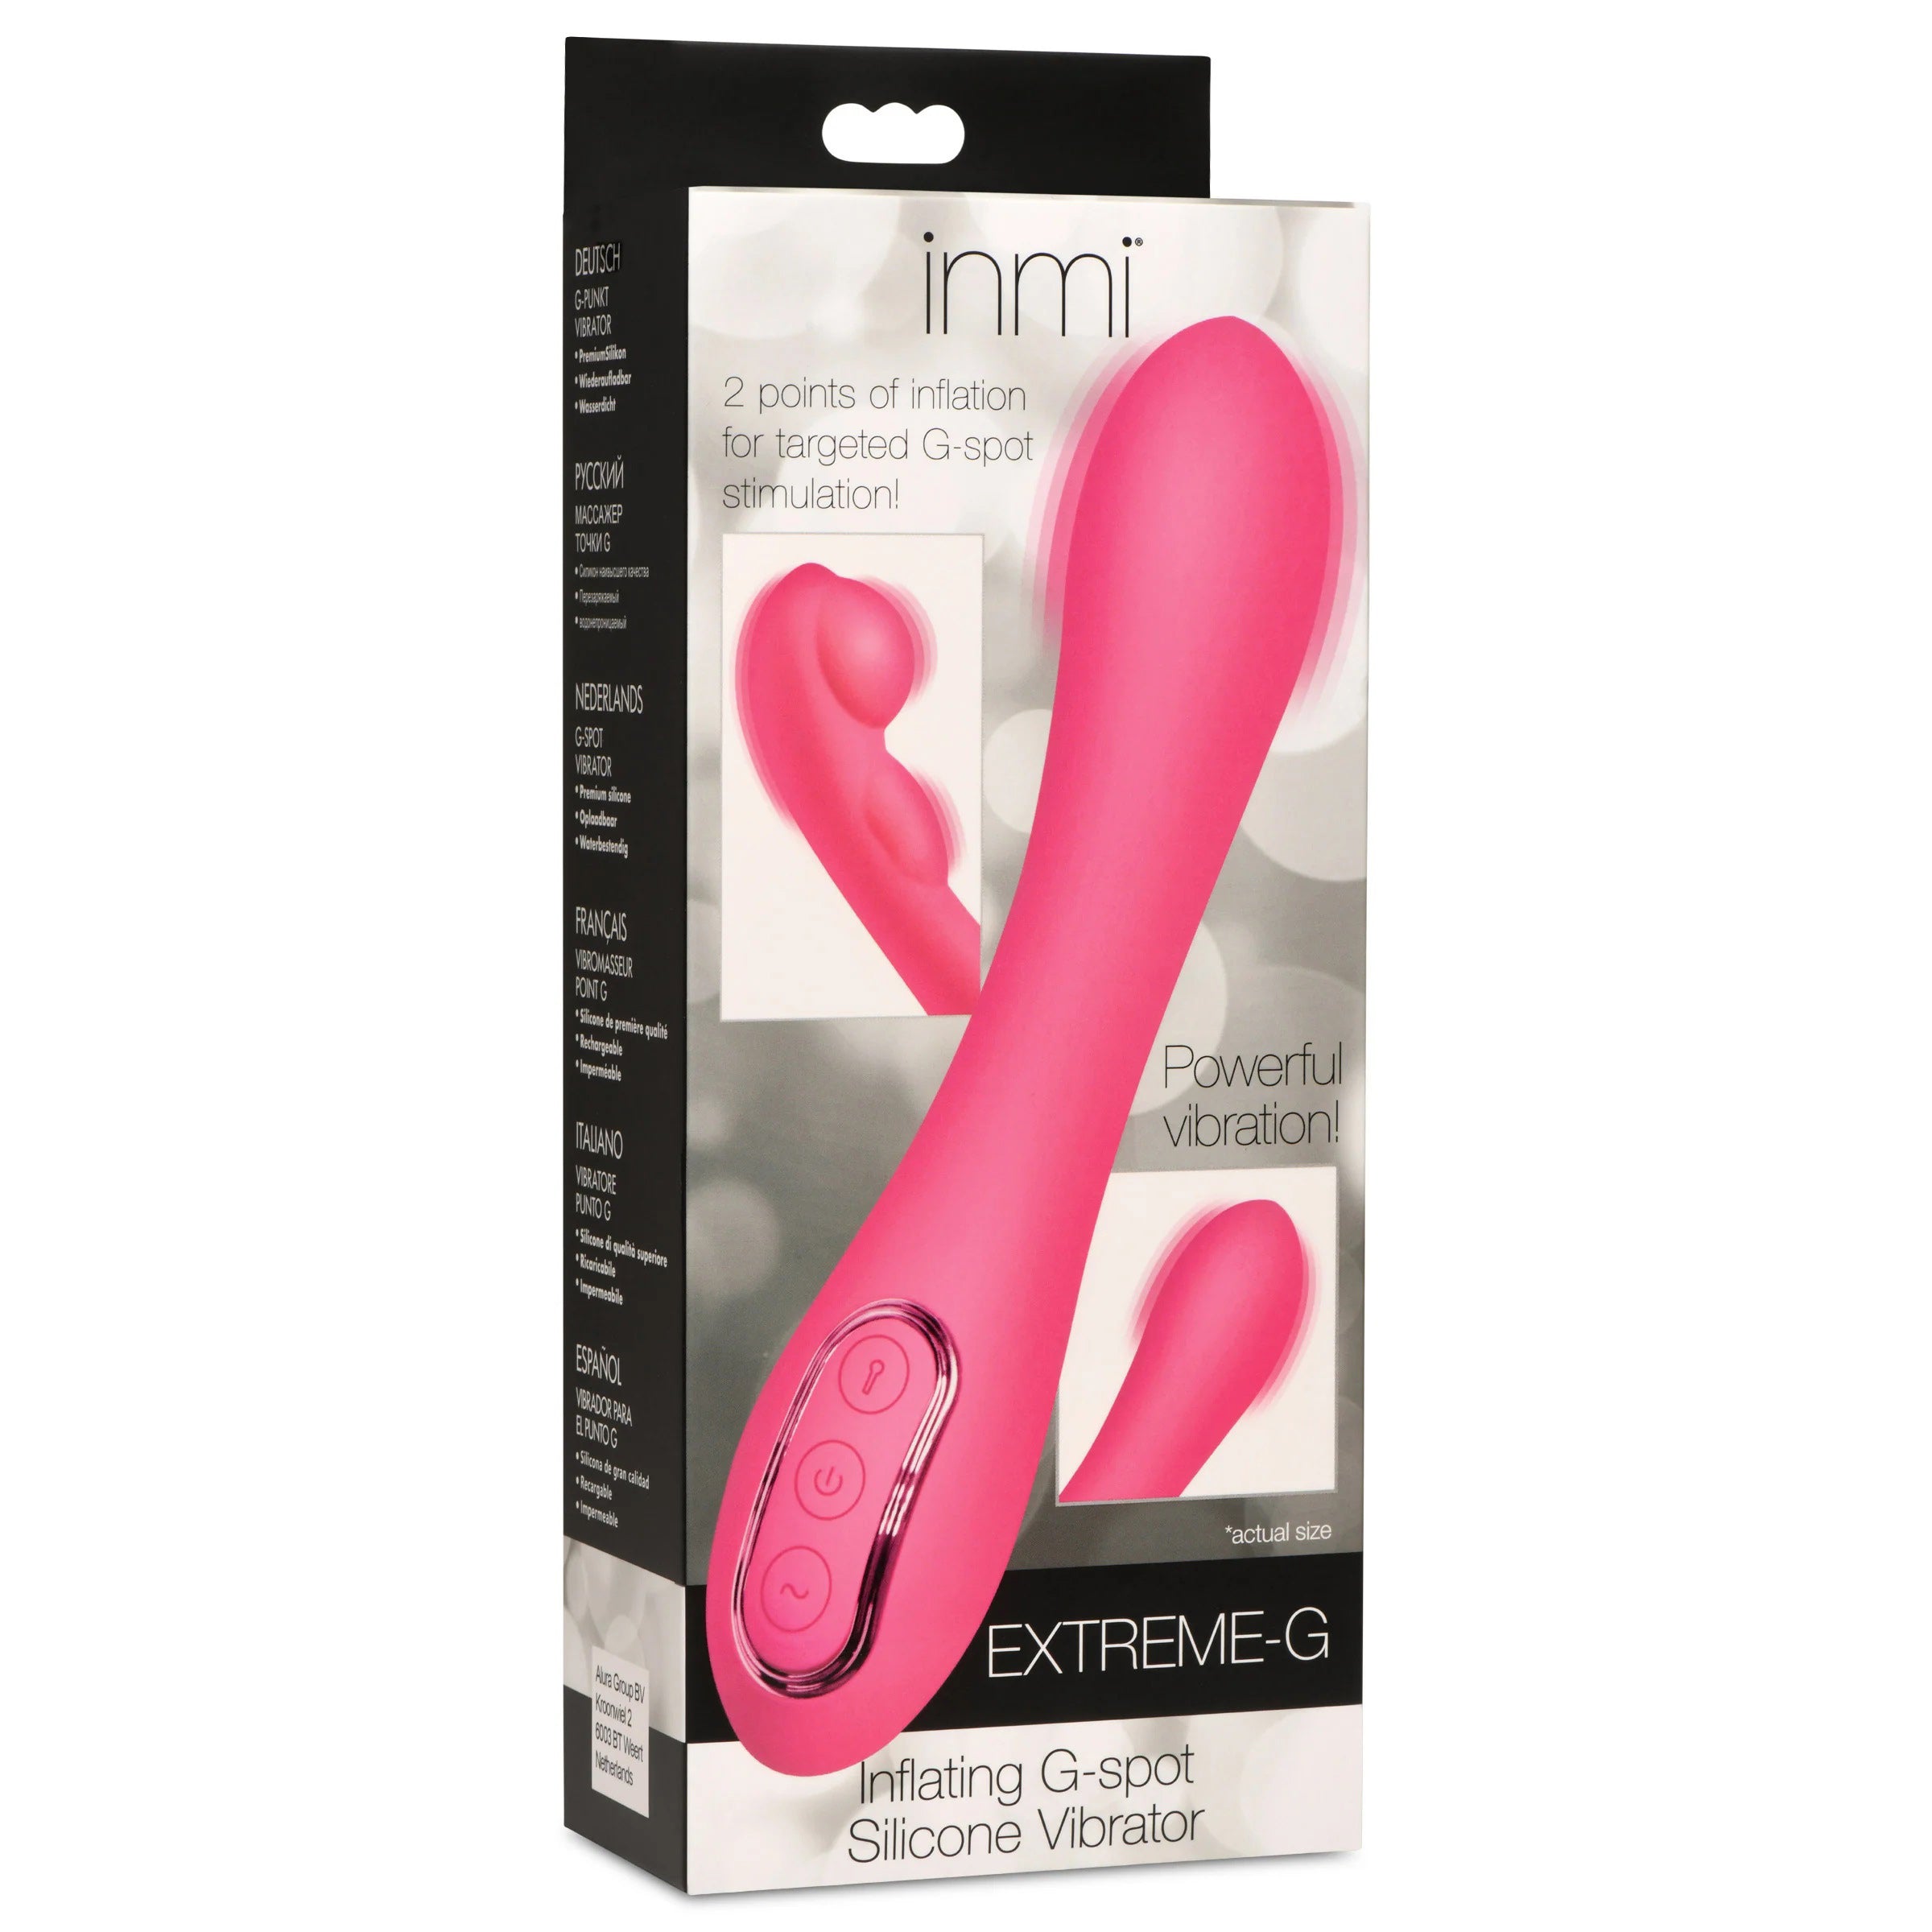 Extreme-G Inflating G-Spot Silicone Vibrator -  Pink-1